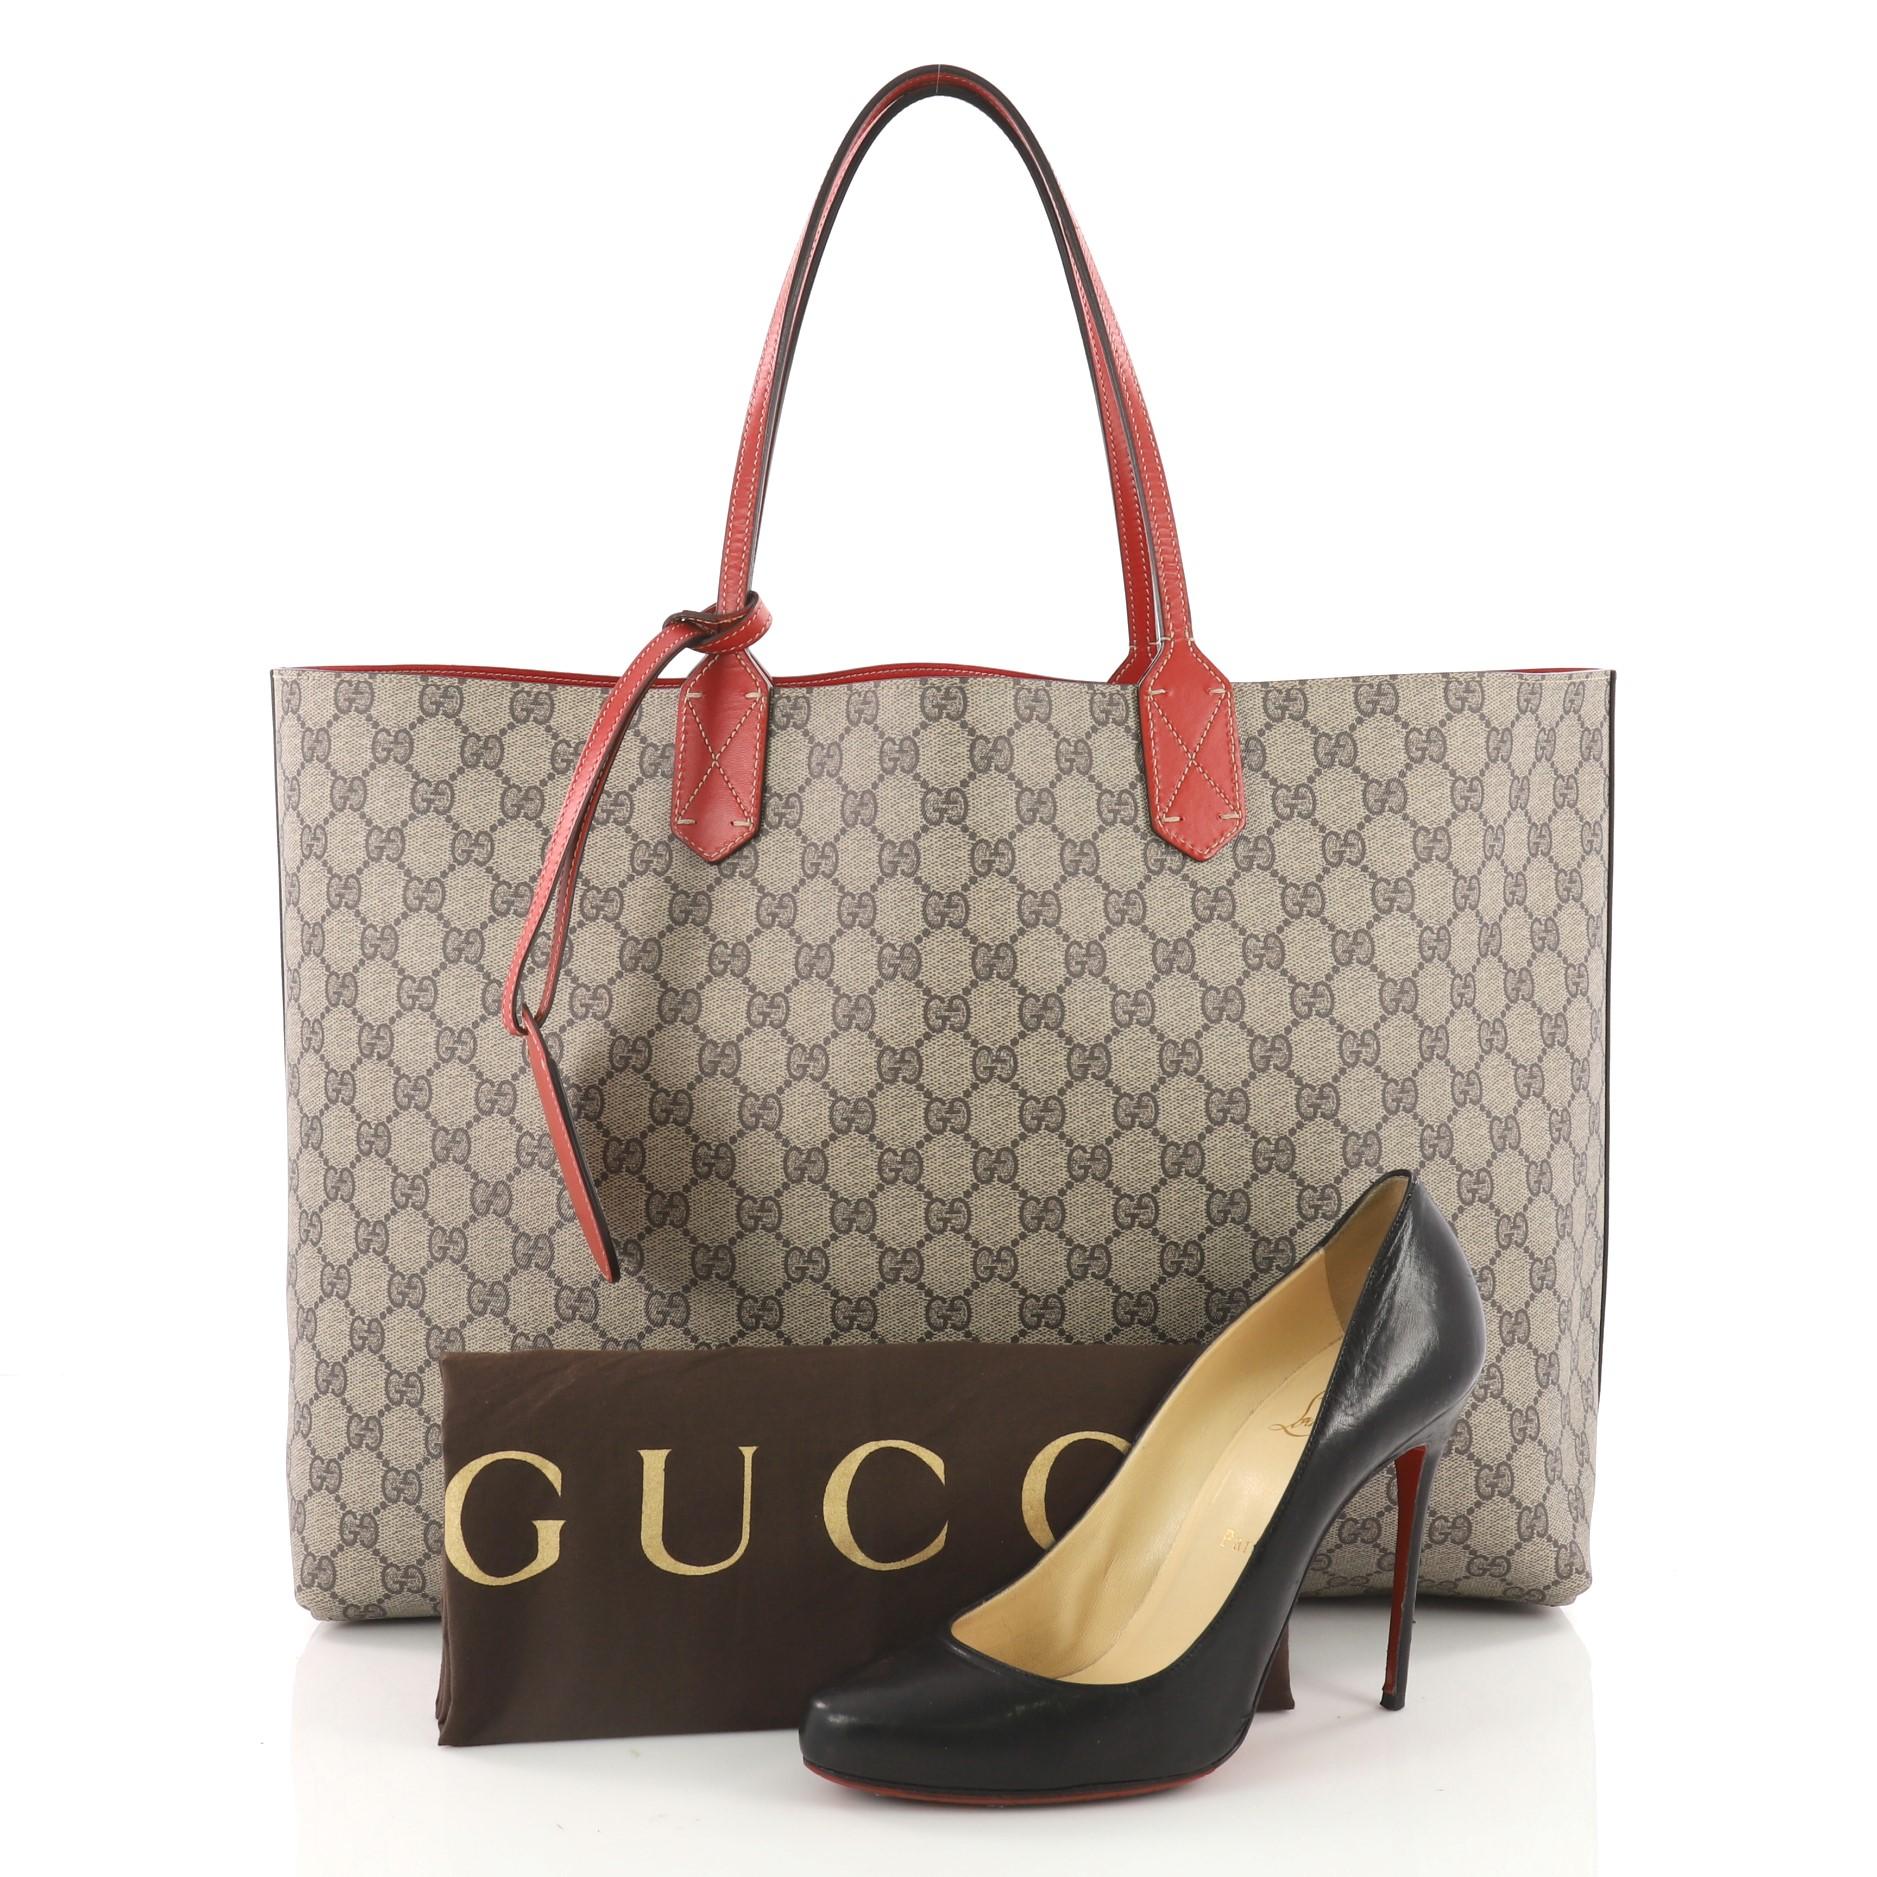 This authentic Gucci Reversible Tote GG Print Leather Medium is perfect for everyday casual looks. Crafted in brown GG print and red leather on its reverse side, this simple shopper-style tote features tall slim handles and subtle Gucci logo at the